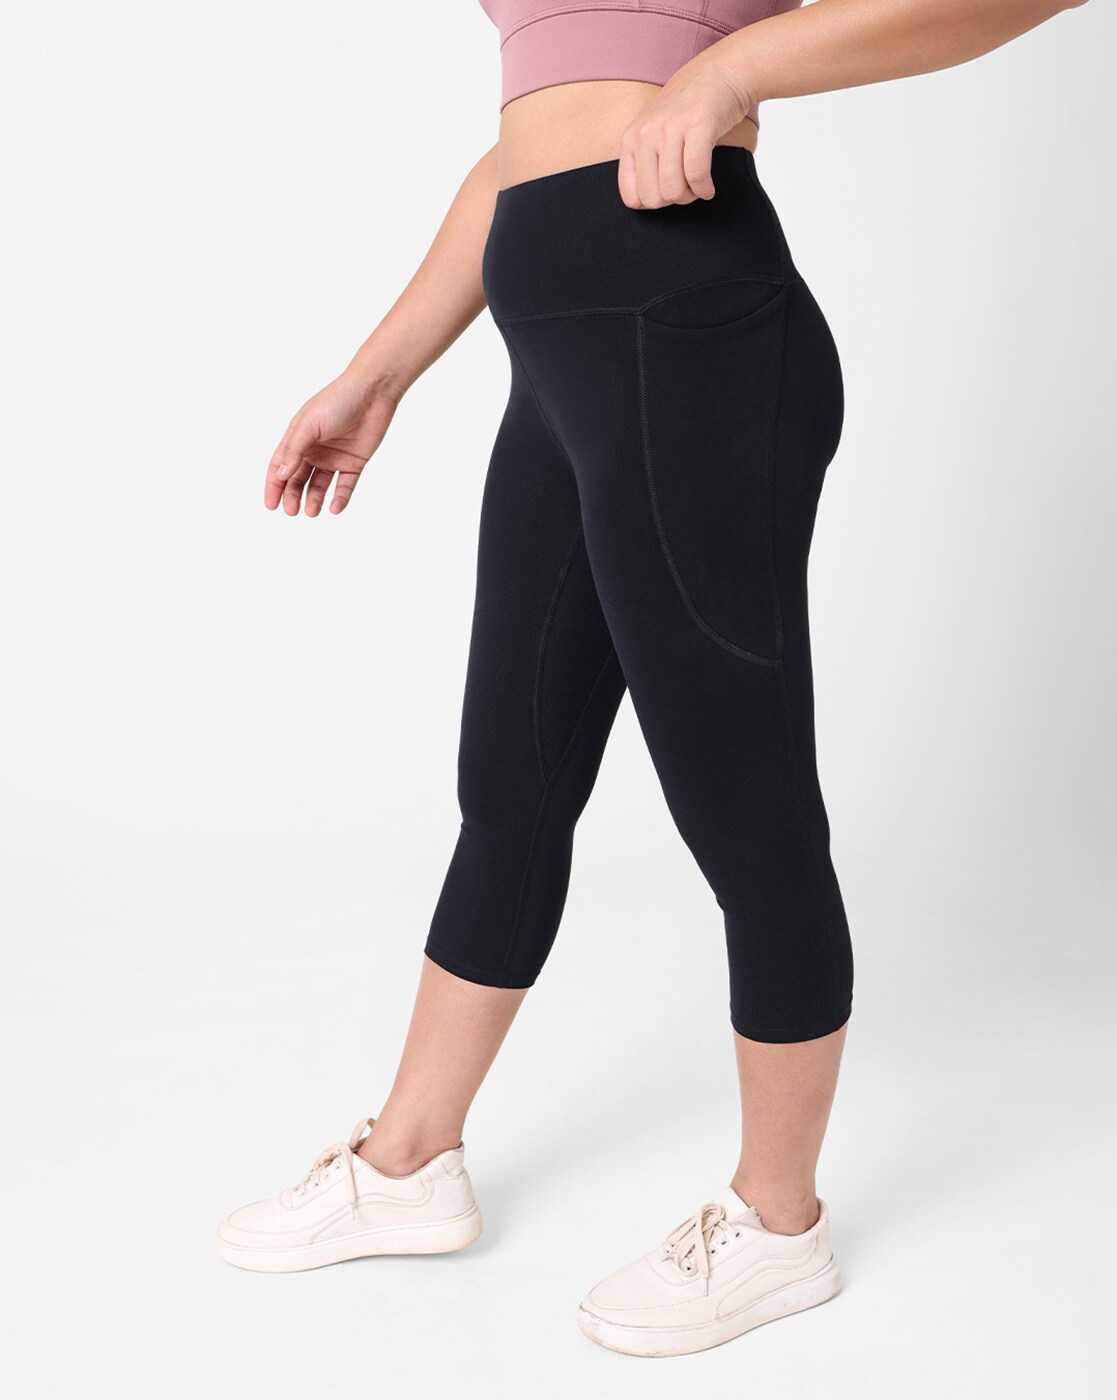 Buy Blissclub Women Black Groove-In Cotton Leggings with Adjustable Inner  Drawcord and Side Pockets online